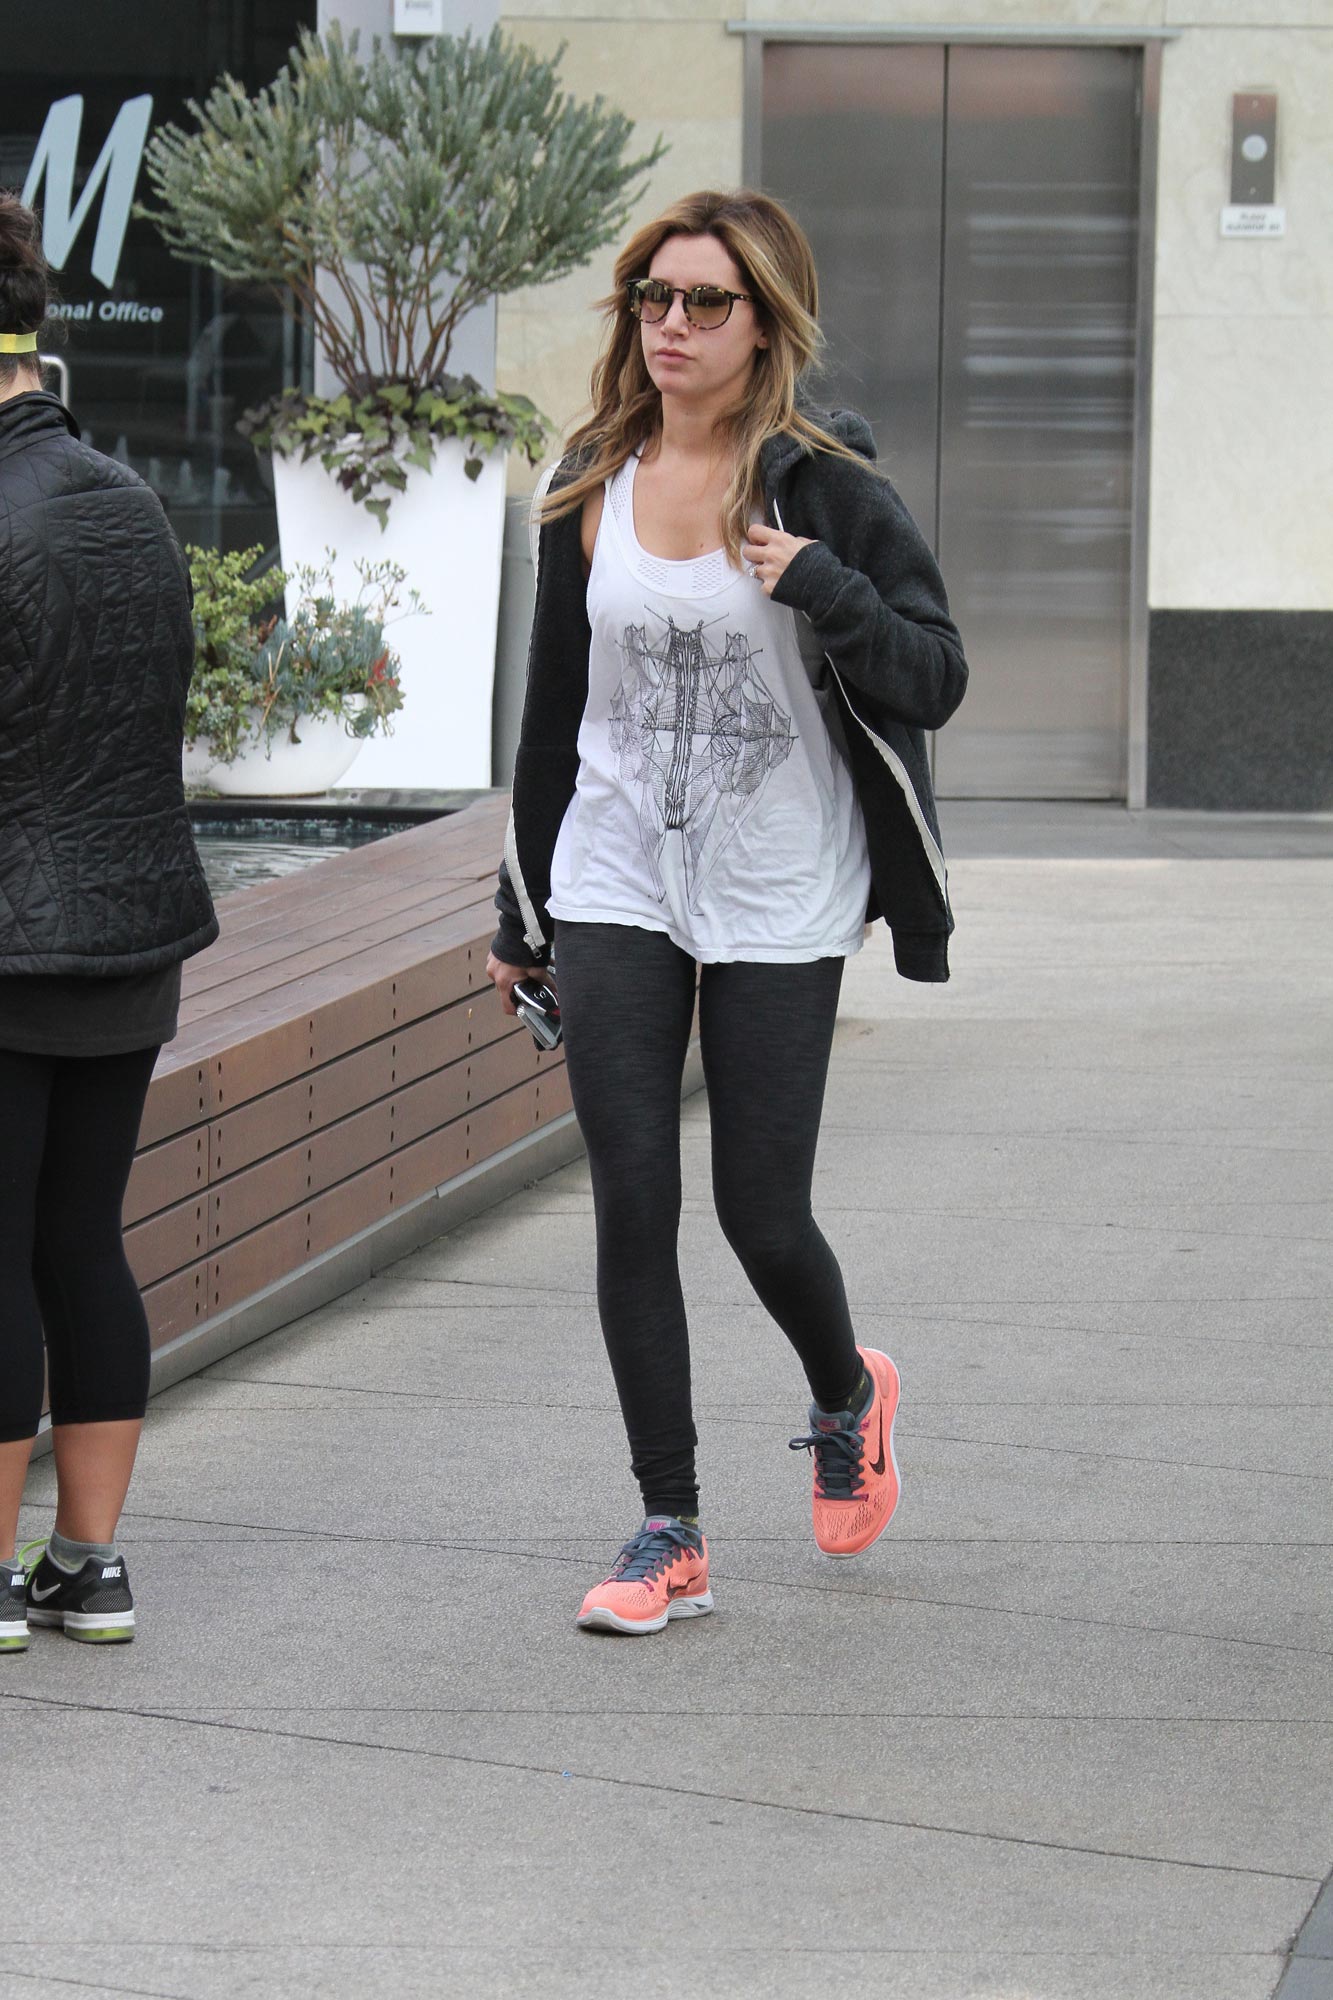 Ashley Tisdale and Vanessa Leave the Gym December 26, 2007 – Star Style